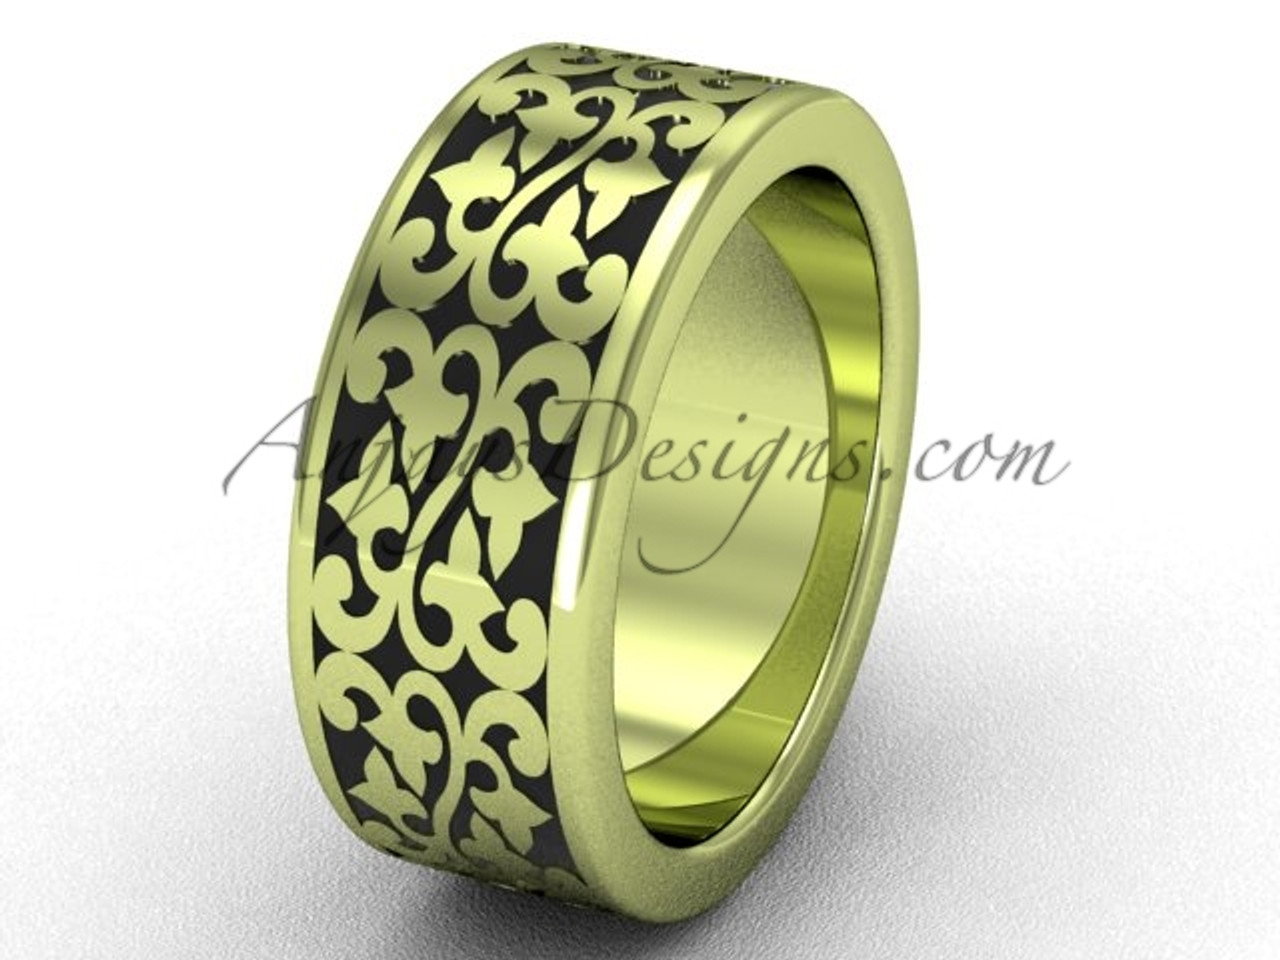 Amazon.com: Personalized 24K Plated Deep Gold ToneSolid Heavy Tungsten Wedding  Ring Couple's Ring Set Custom Engraved Free - Ships from USA: Clothing,  Shoes & Jewelry